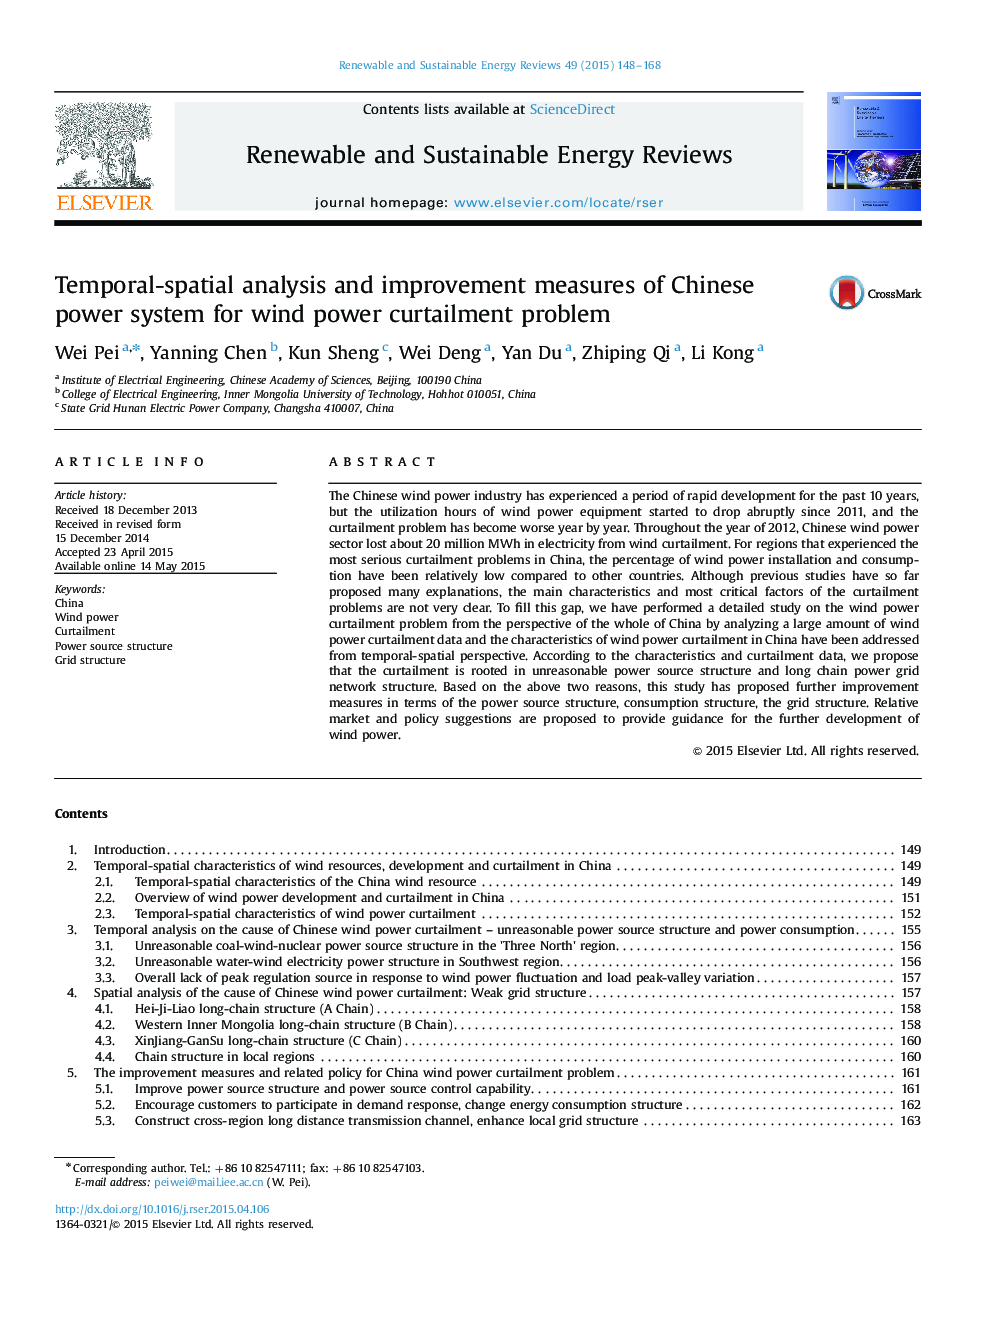 Temporal-spatial analysis and improvement measures of Chinese power system for wind power curtailment problem